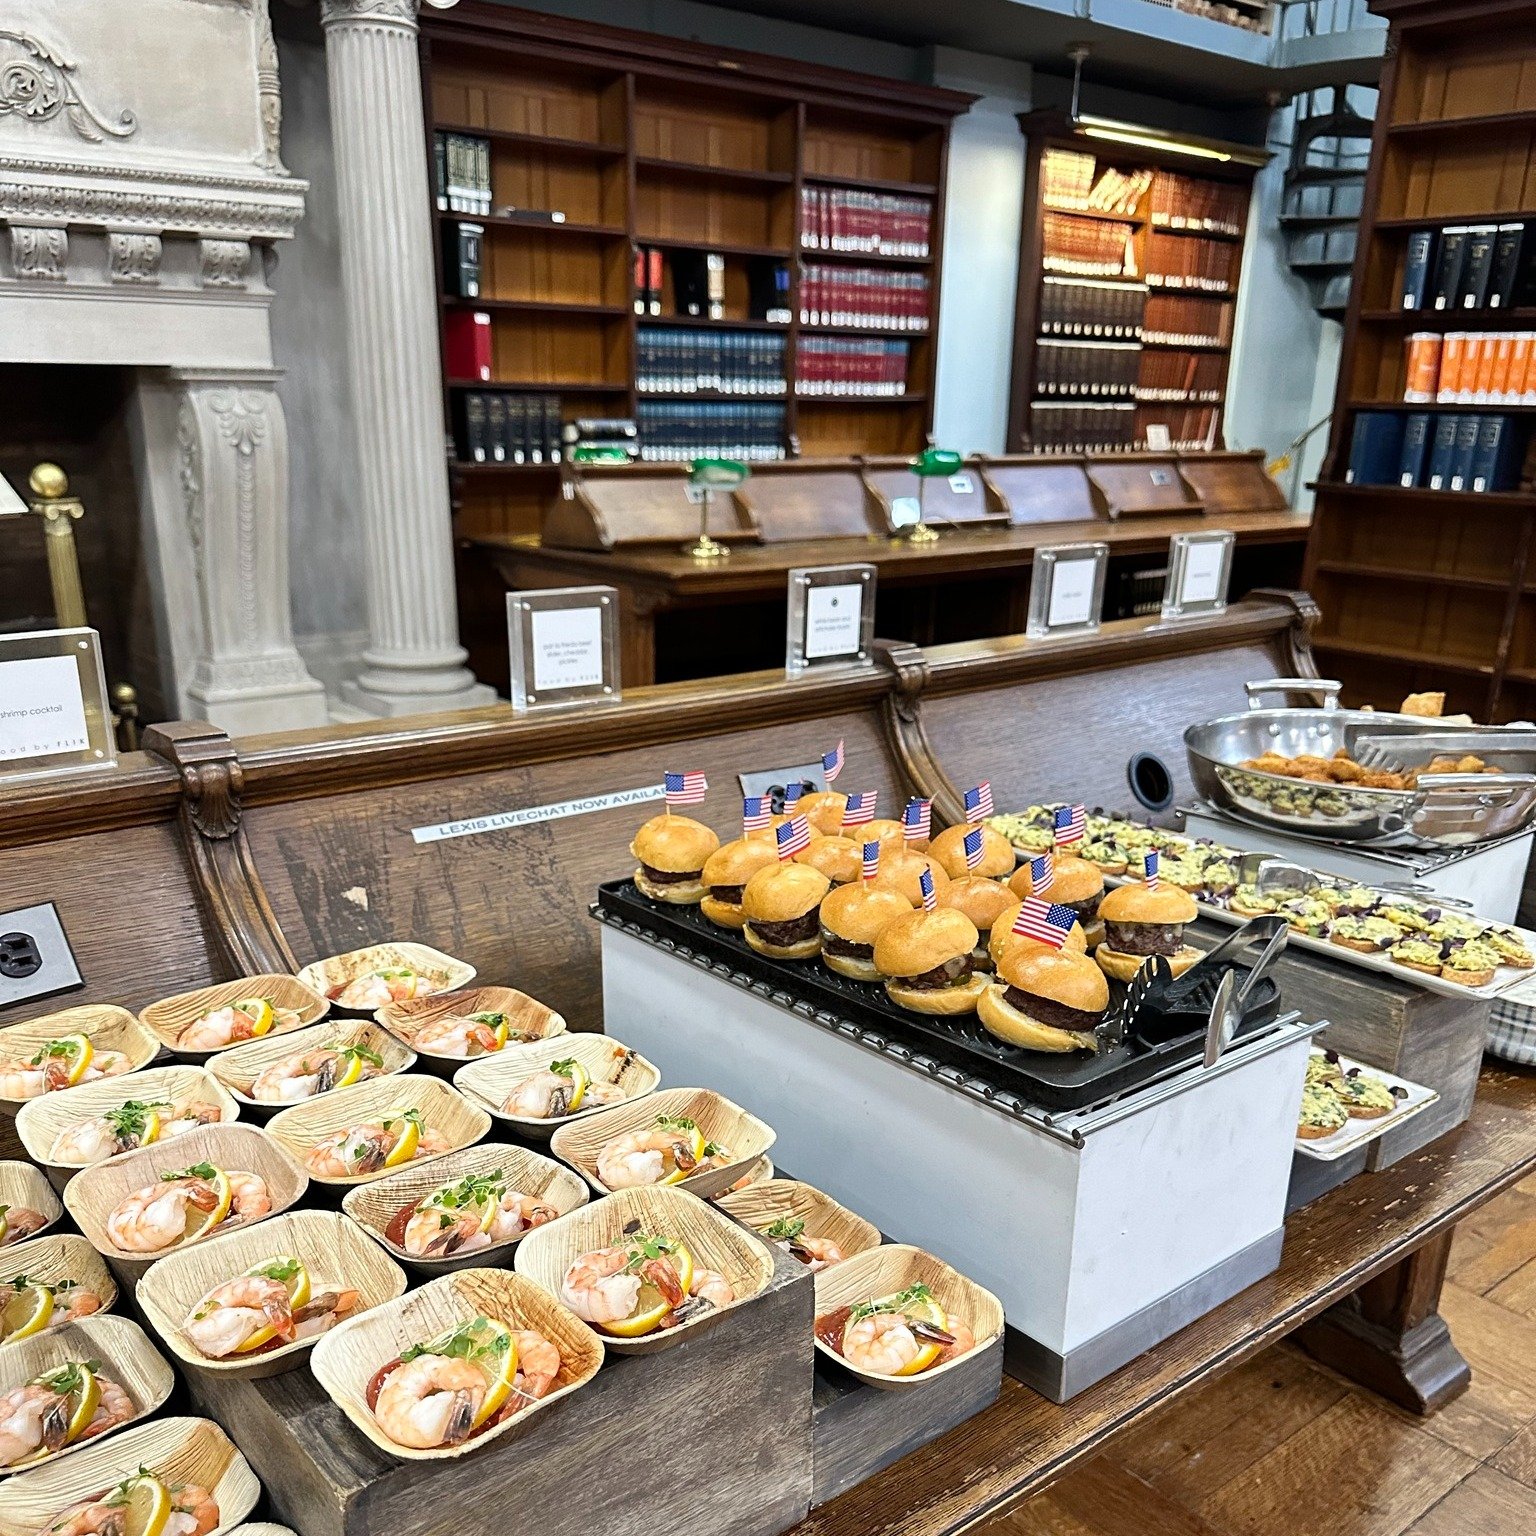 Did you know that our beautiful Library also doubles as an event space? We love a themed event &amp; are happy to customize our menu to encourage that! American flag sliders for MDW anyone? 🍔🍟

@flikhospitality